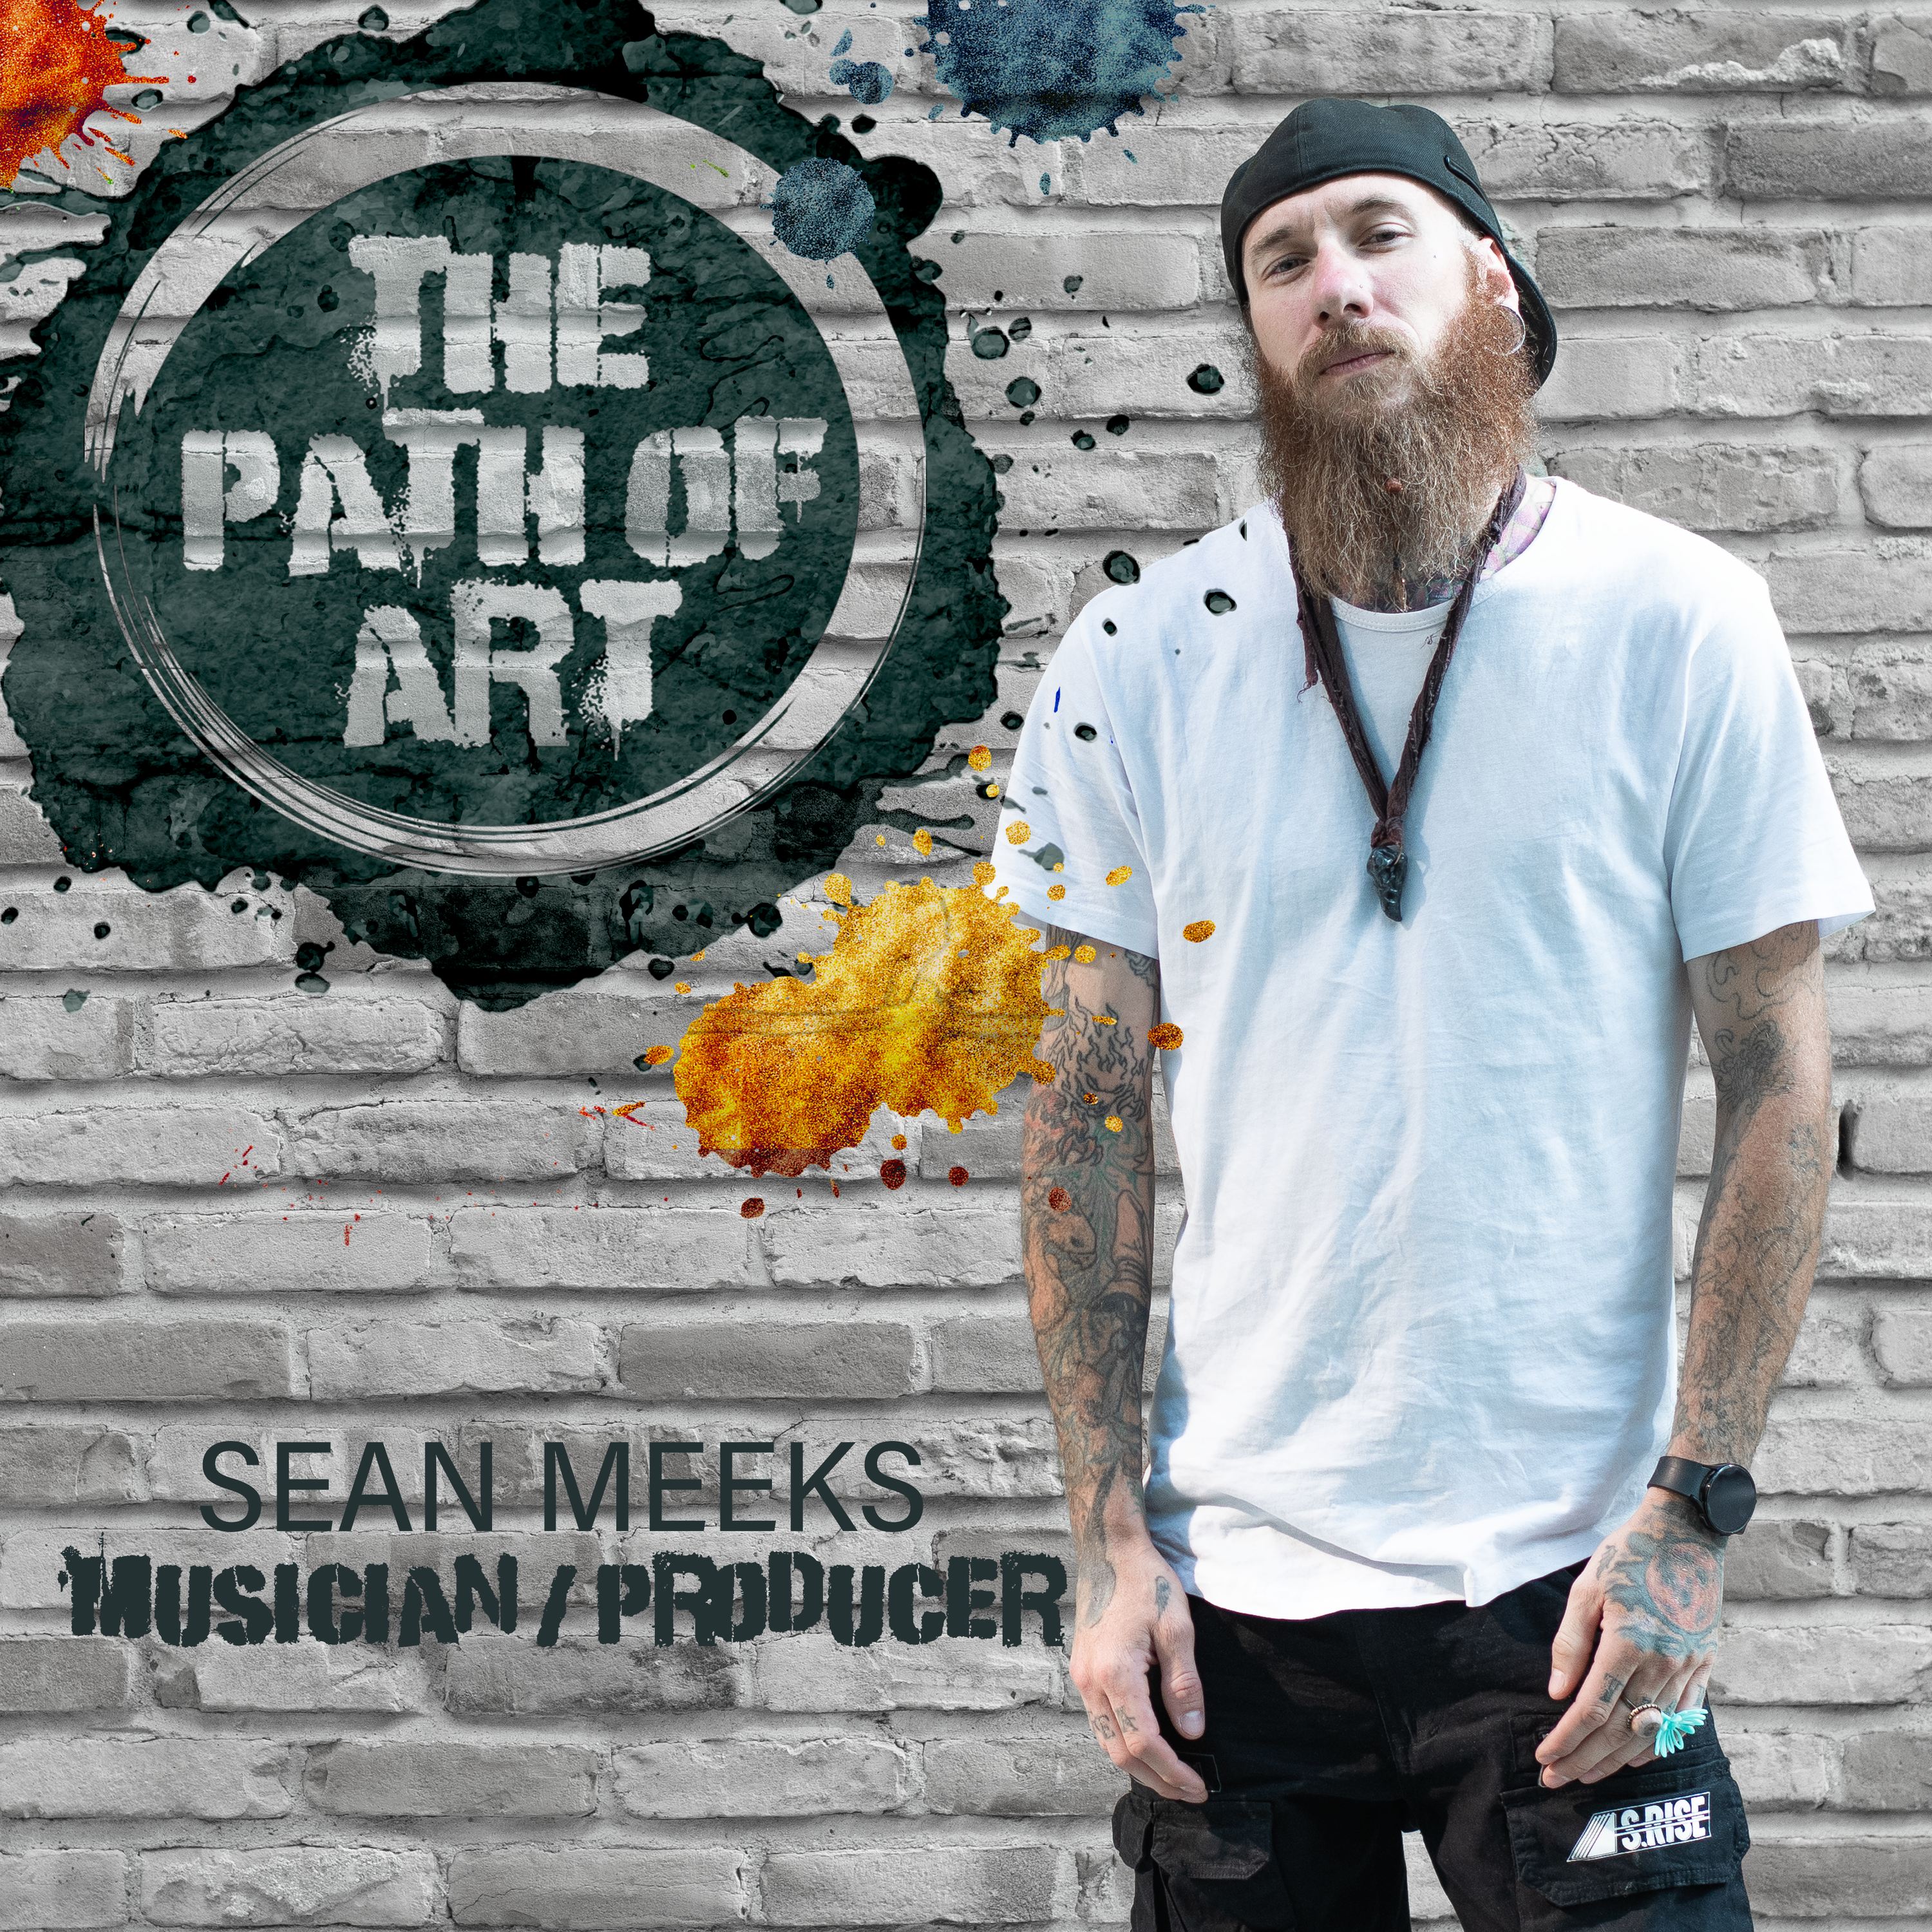 #22 Sean Meeks: The obstacles we face